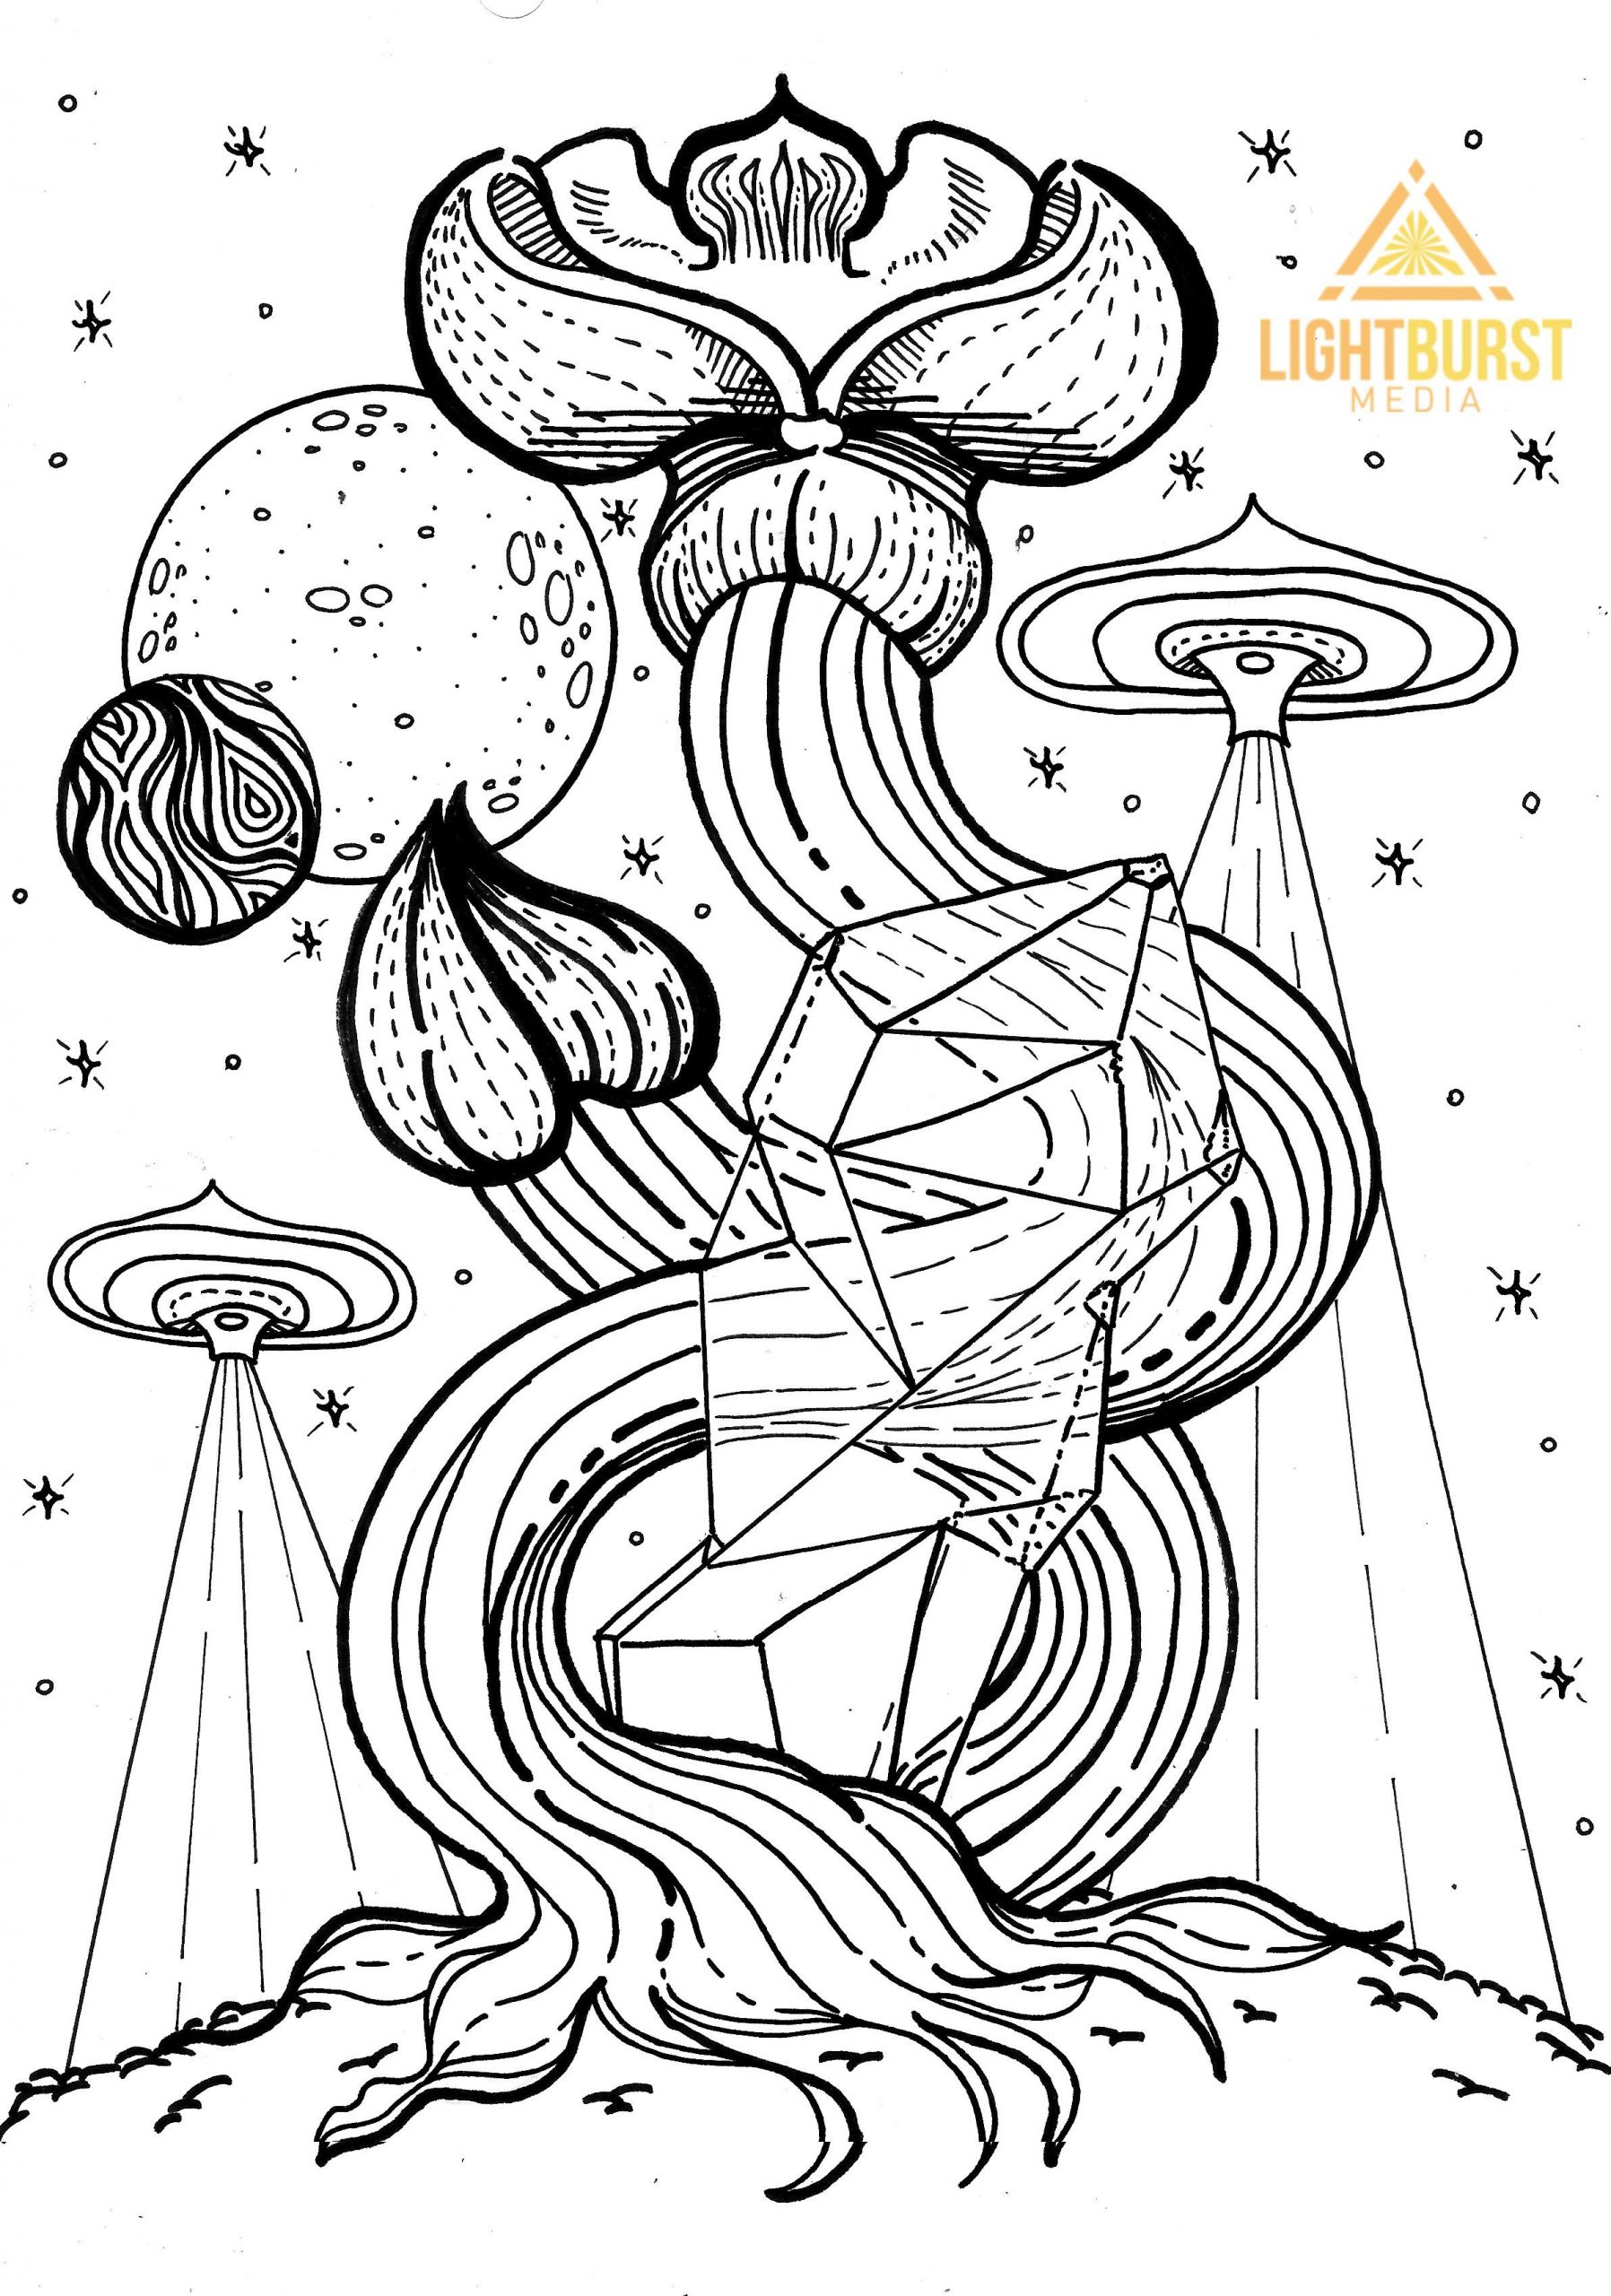 Online Coloring Books For Adults
 Free Coloring Page from Space Dreams Sci Fi Adult